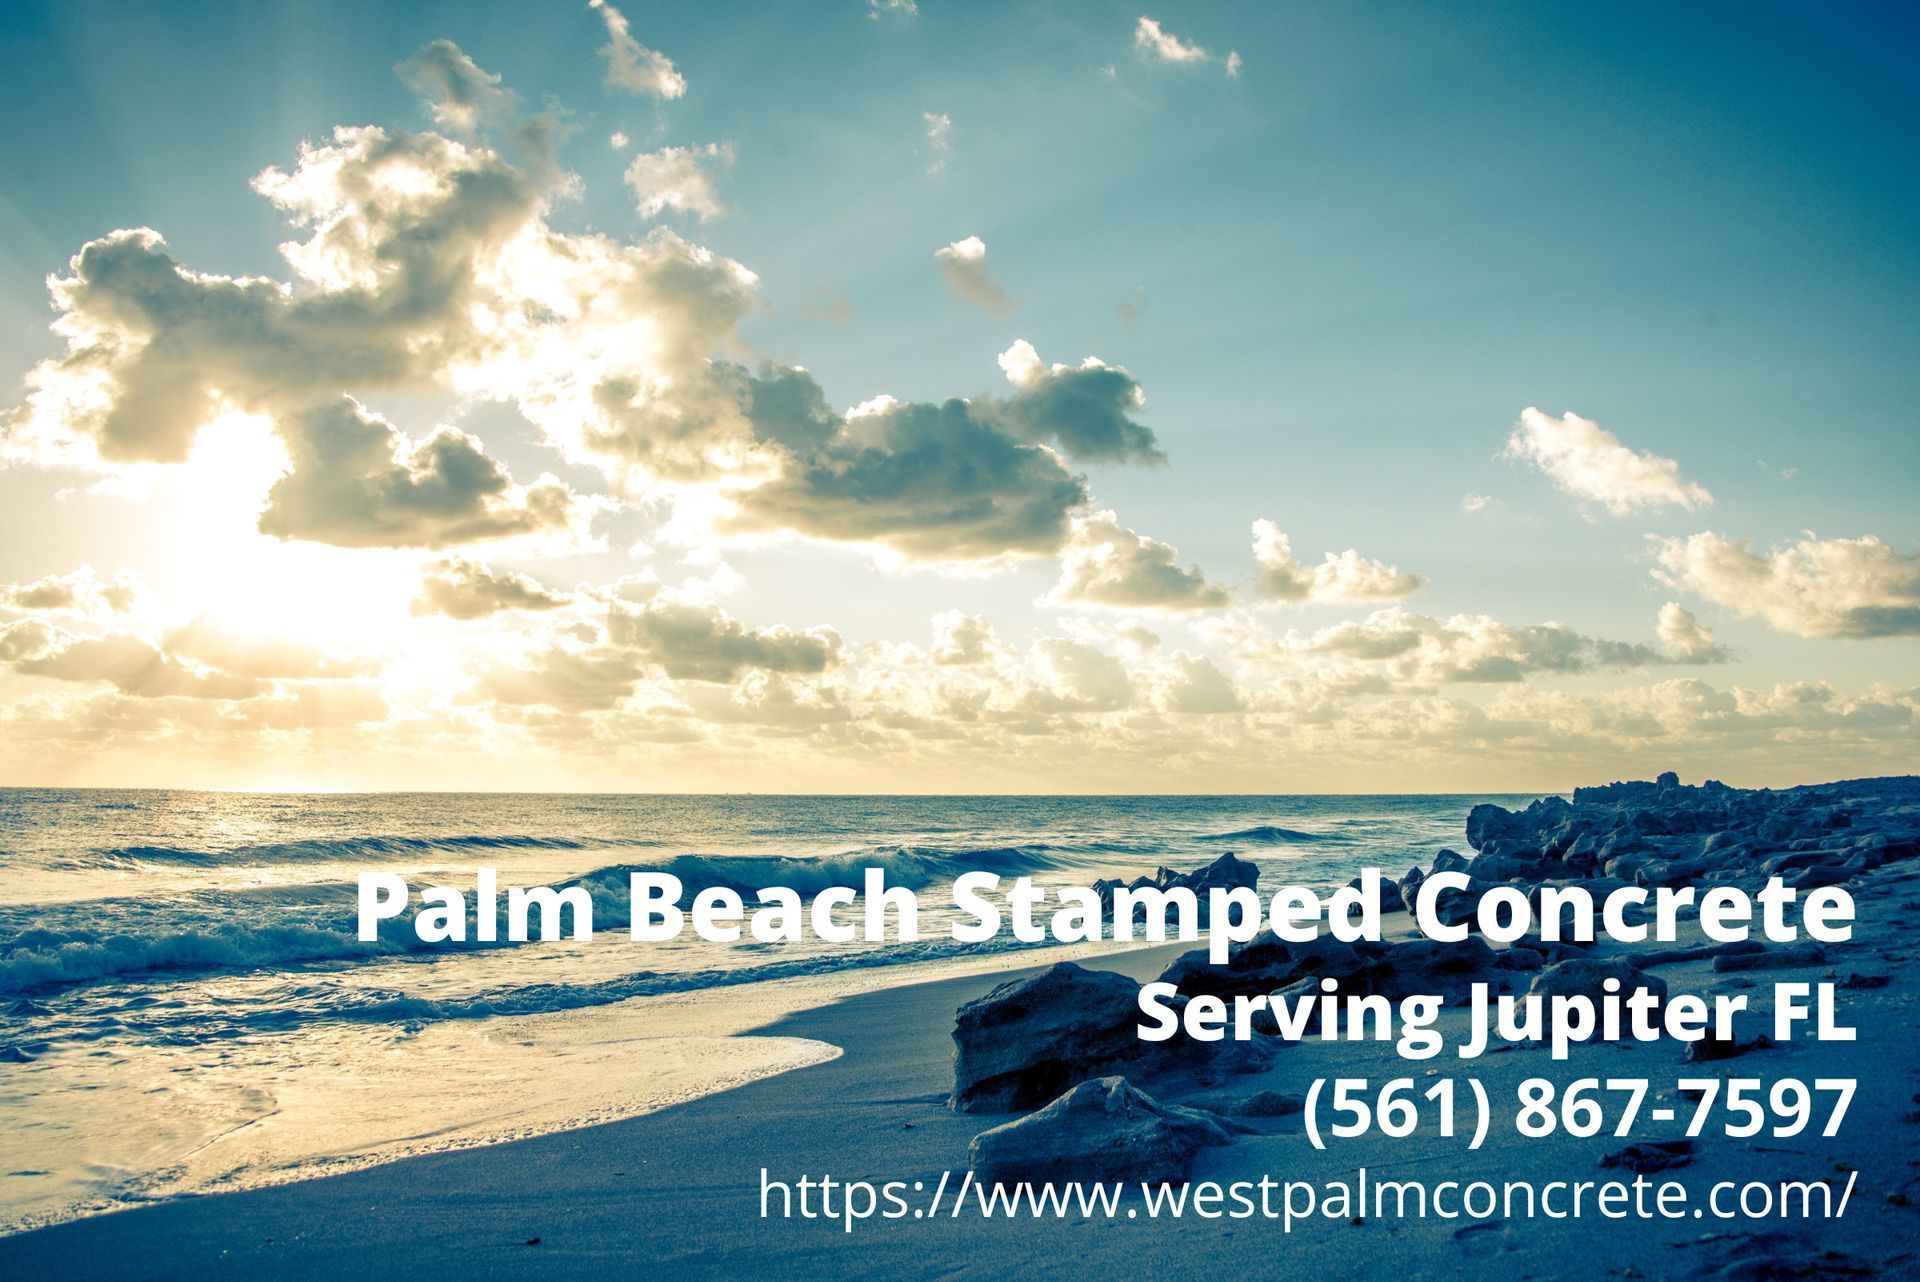 business info of Palm Beach Stamped Concrete - a decorative concrete contractor serving Jupiter FL and the neighboring areas